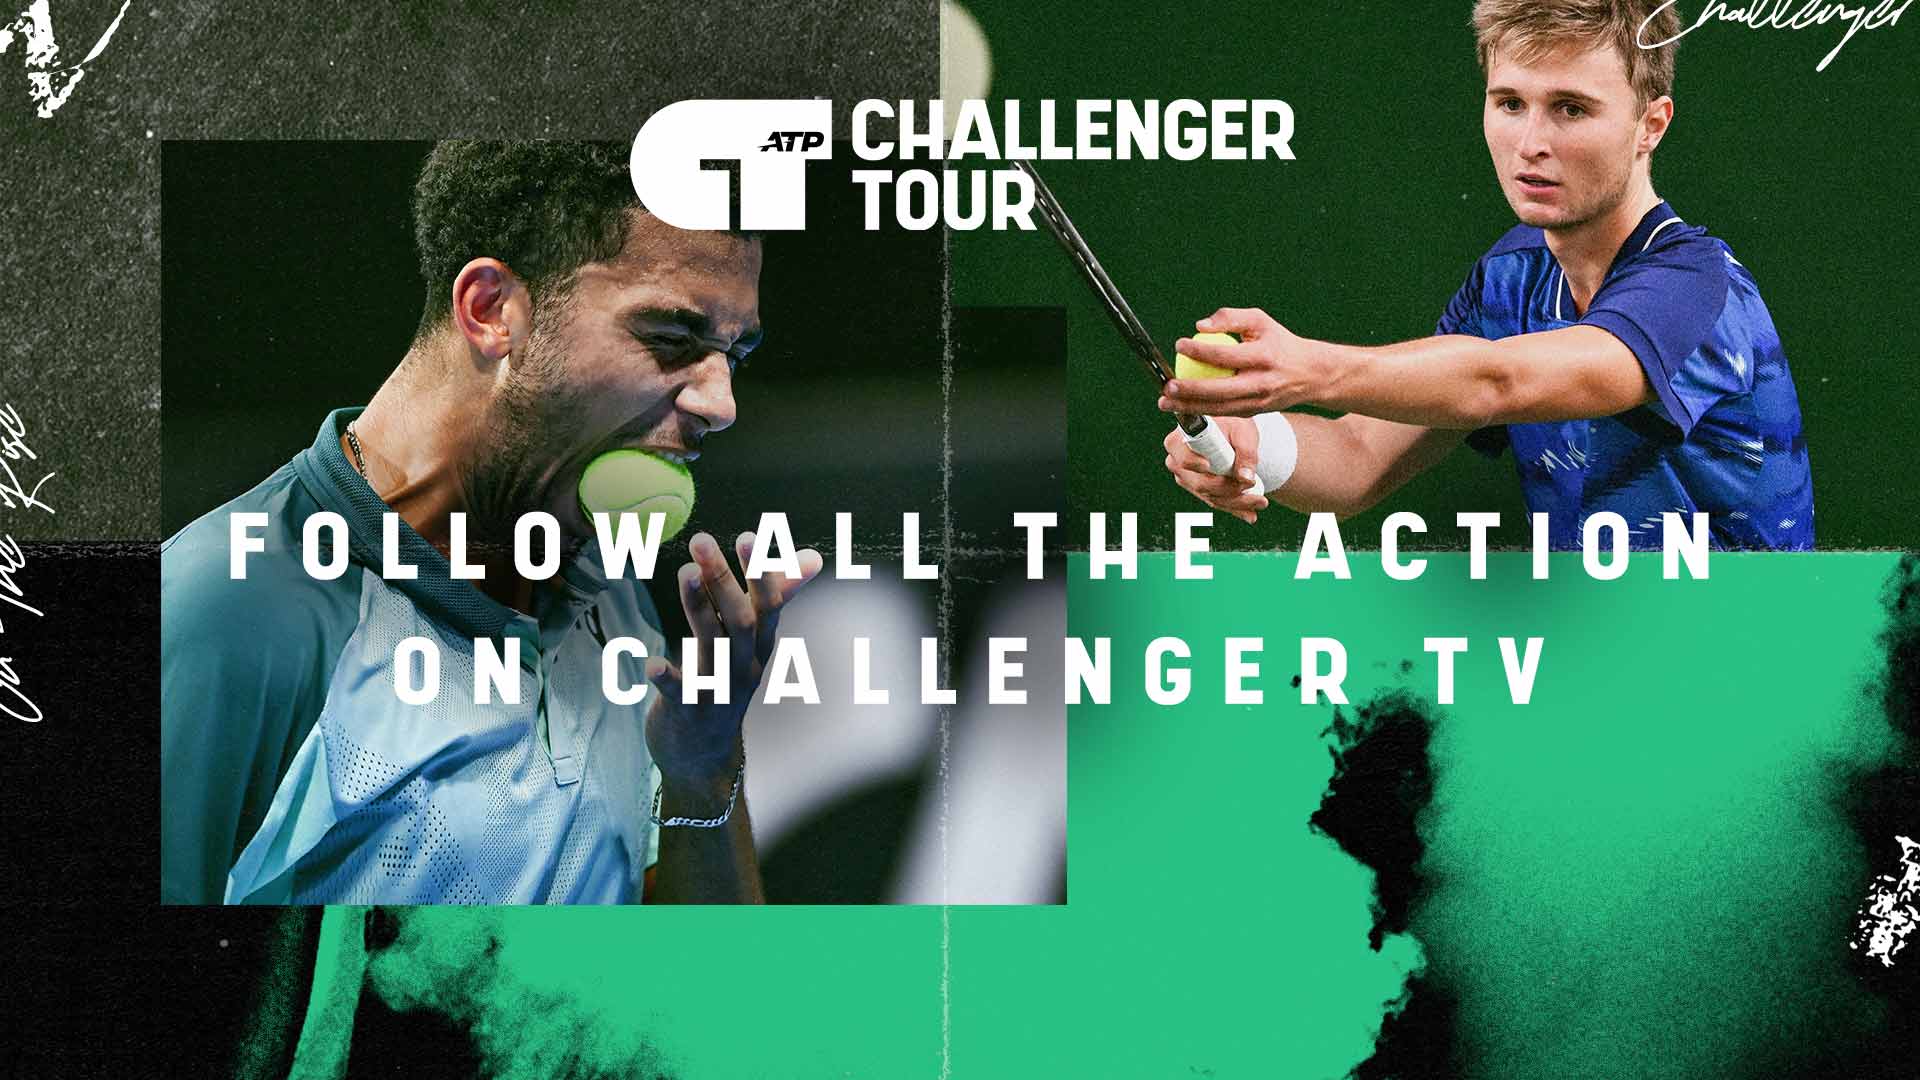 How To Watch ATP Challenger TV; View Schedule & Scores ATP Tour